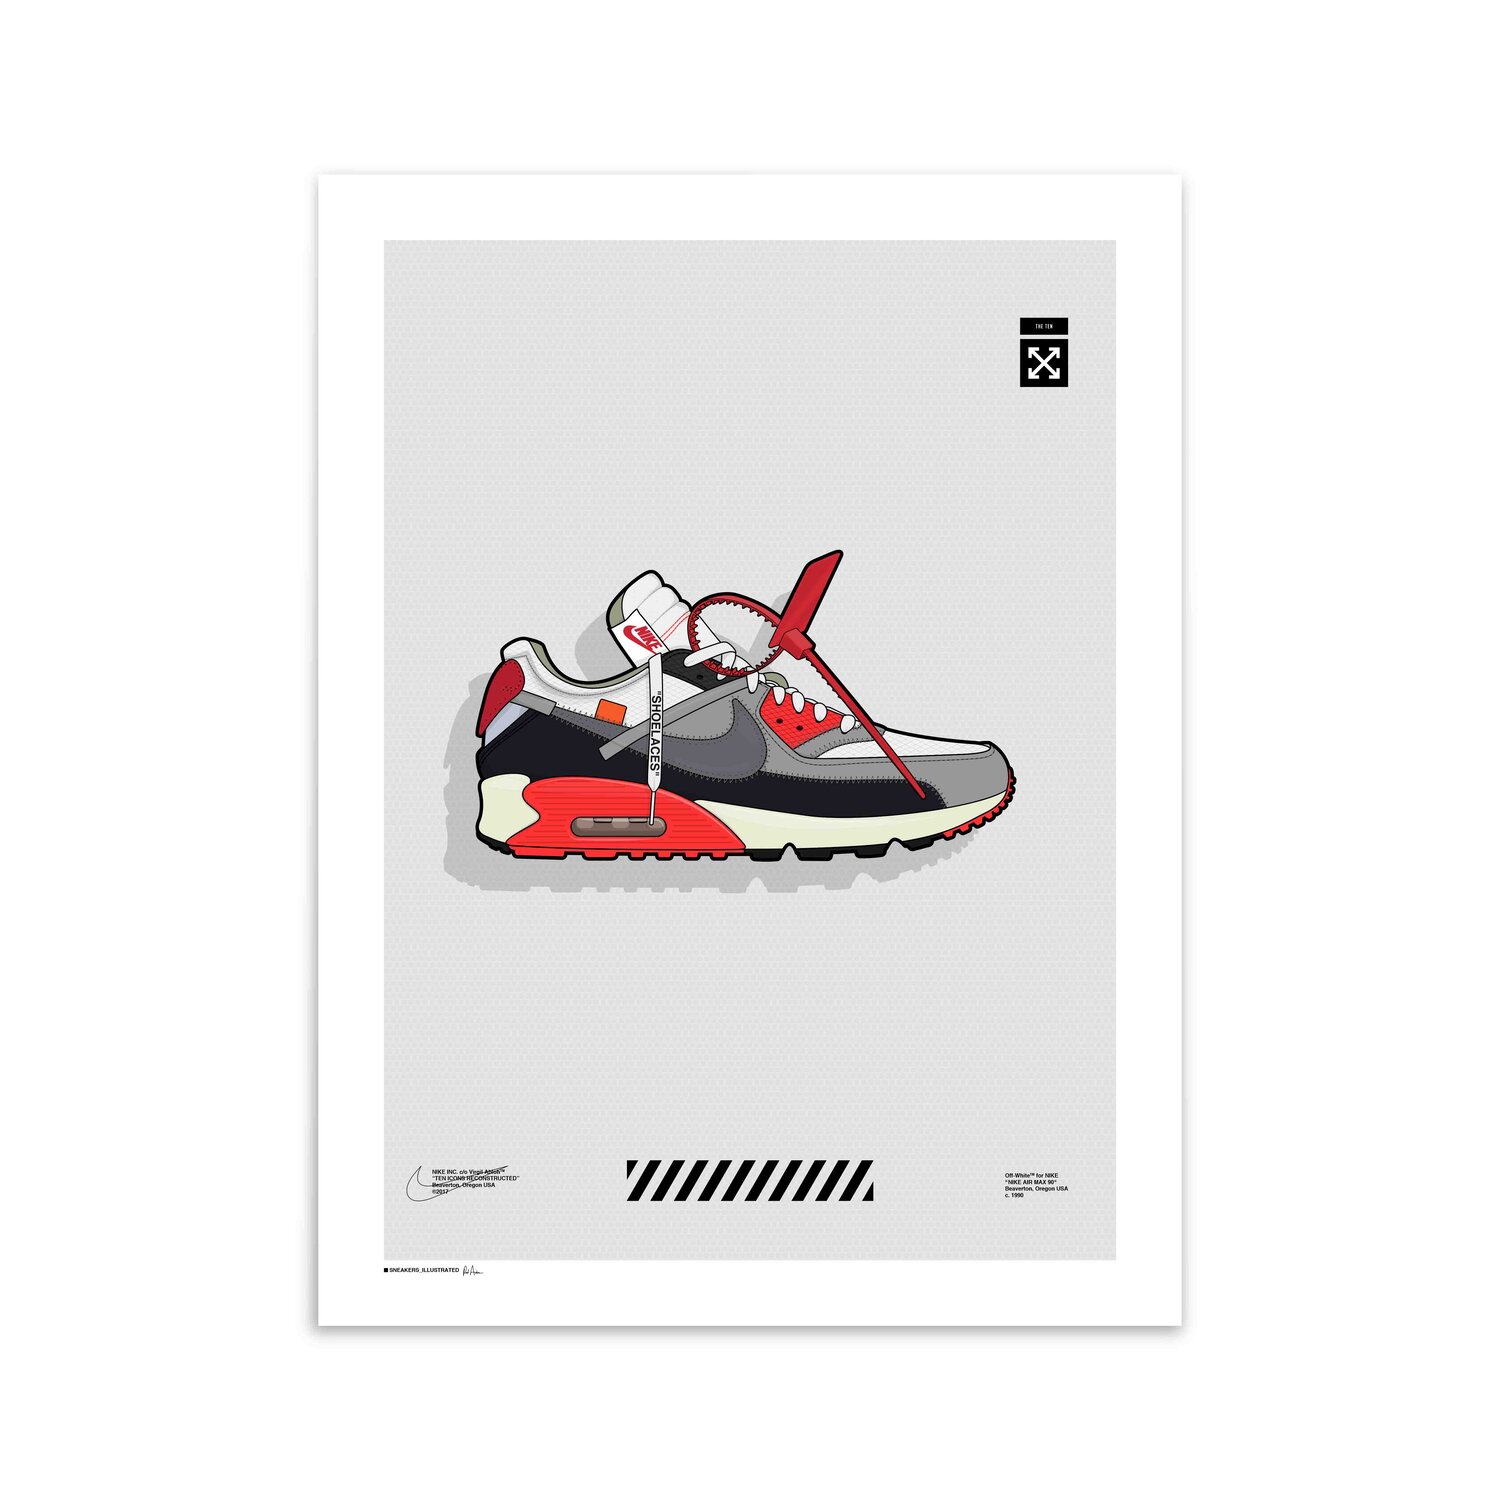 Nike Air Max 1/97 'Blue [Unreleased]' Poster Sneakers Illustrated